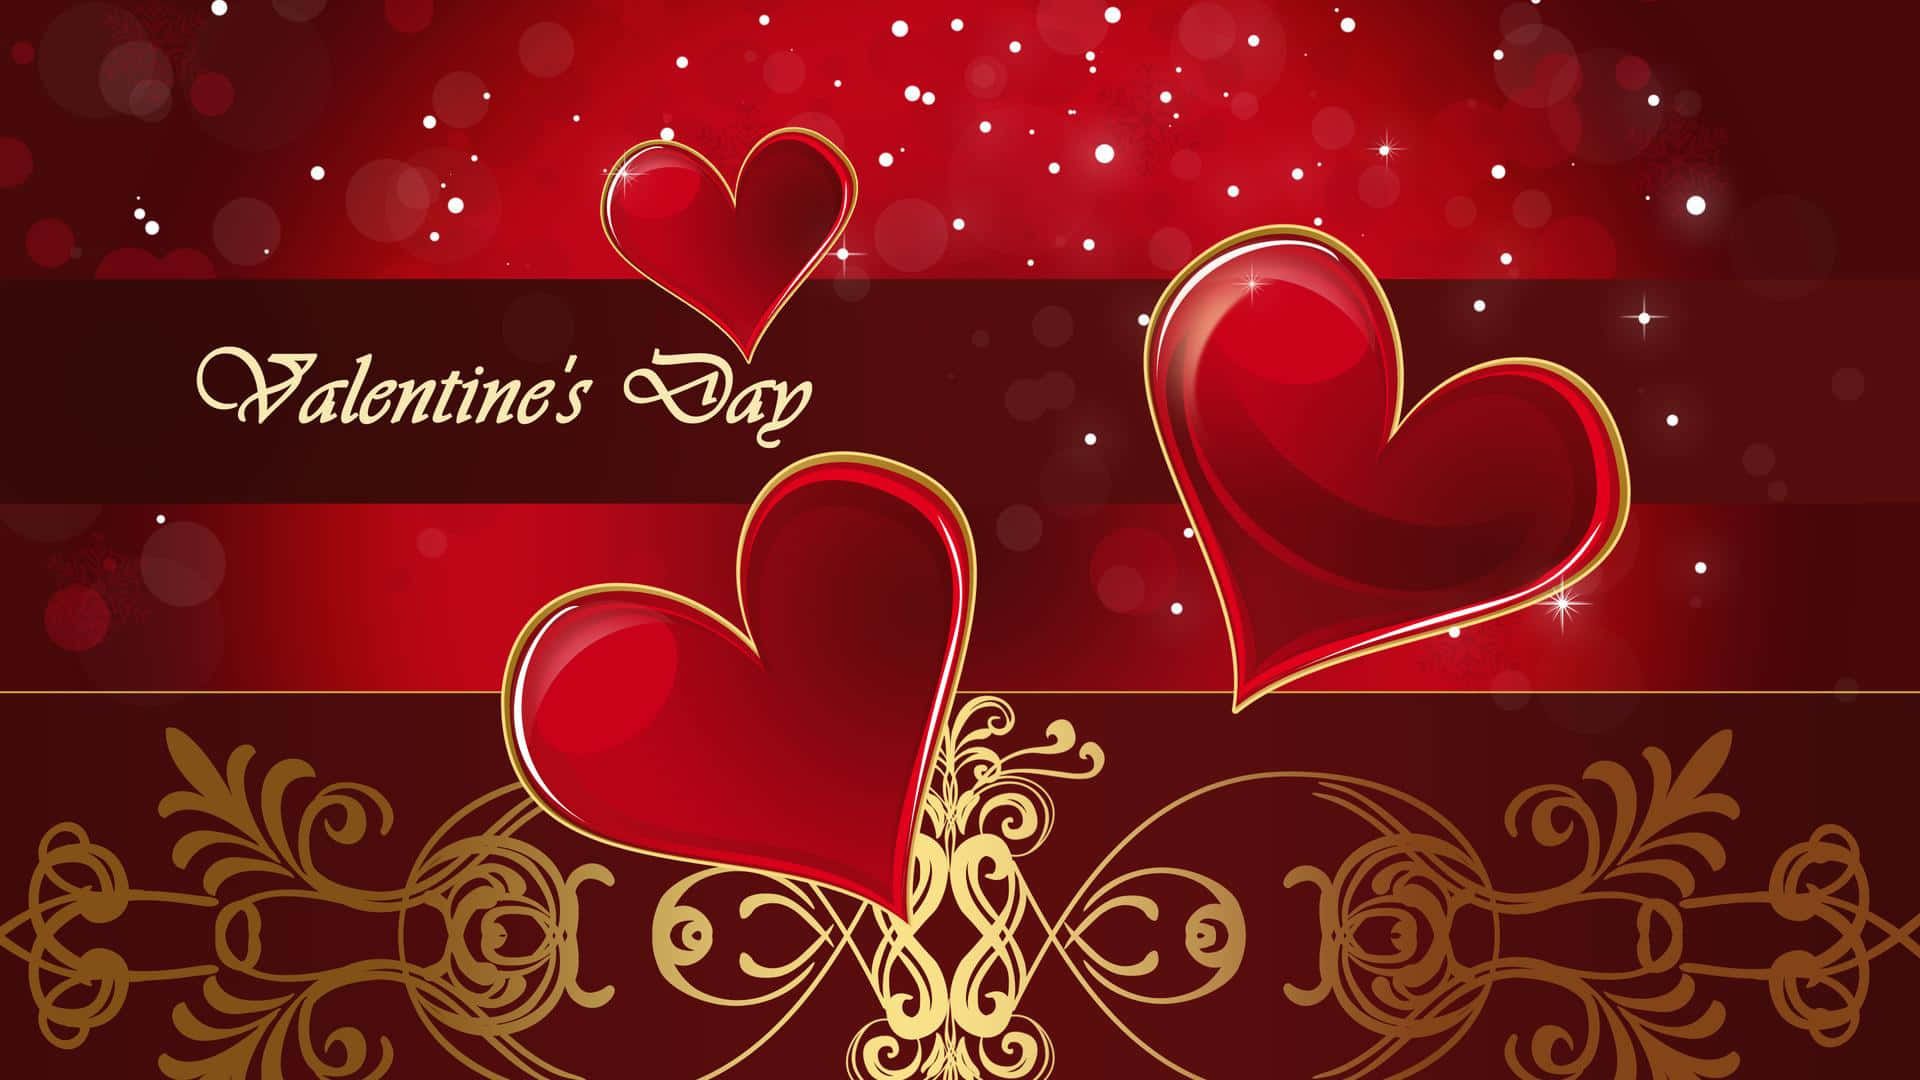 Red Hearts And Golden Symbols Valentines Day Background